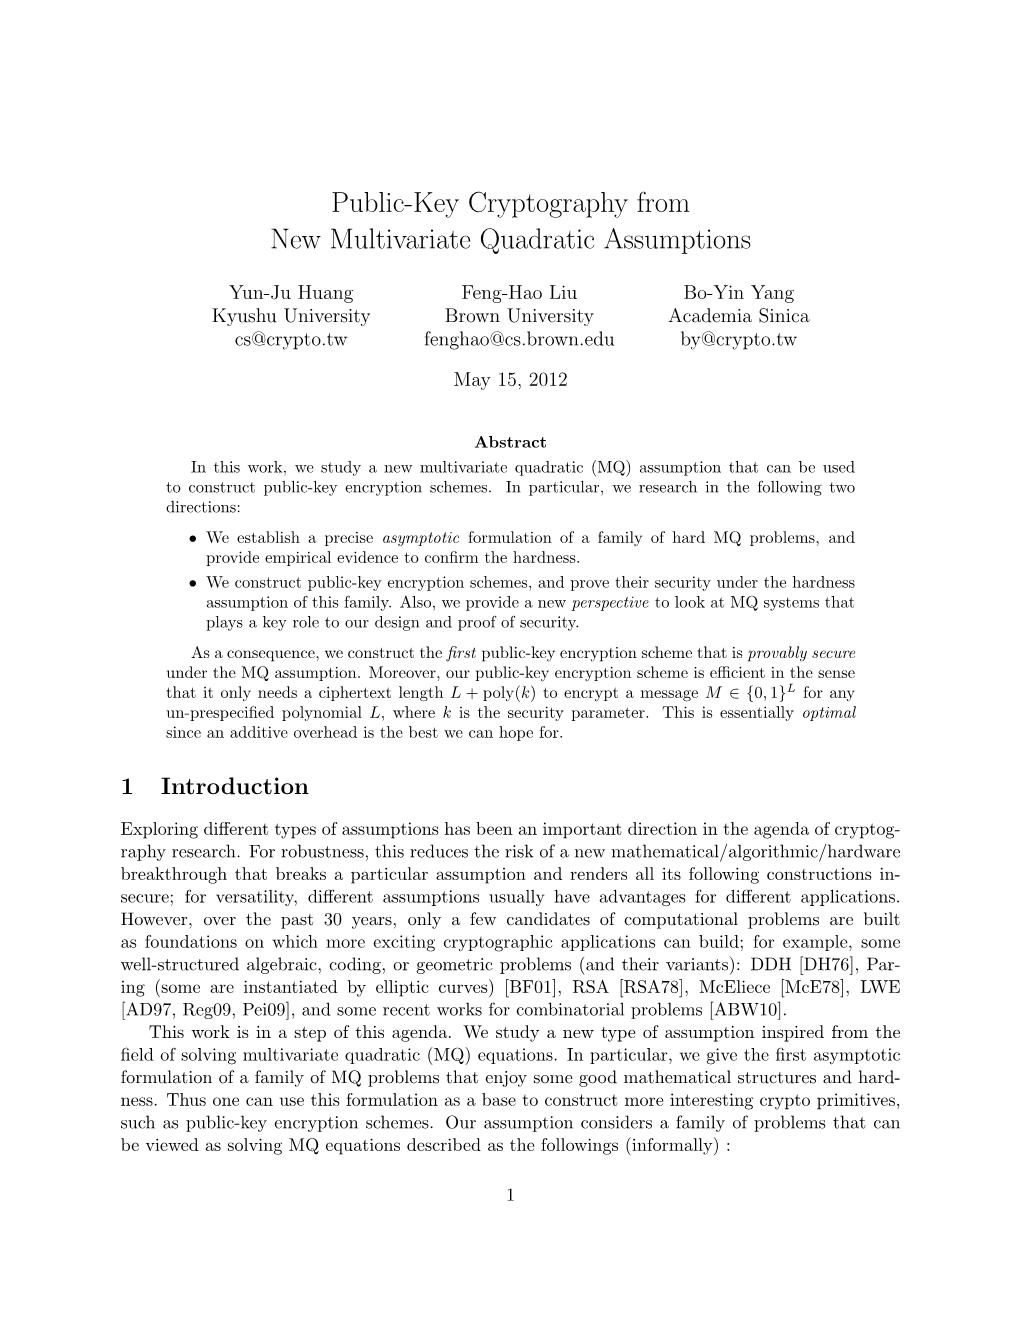 Public-Key Cryptography from New Multivariate Quadratic Assumptions